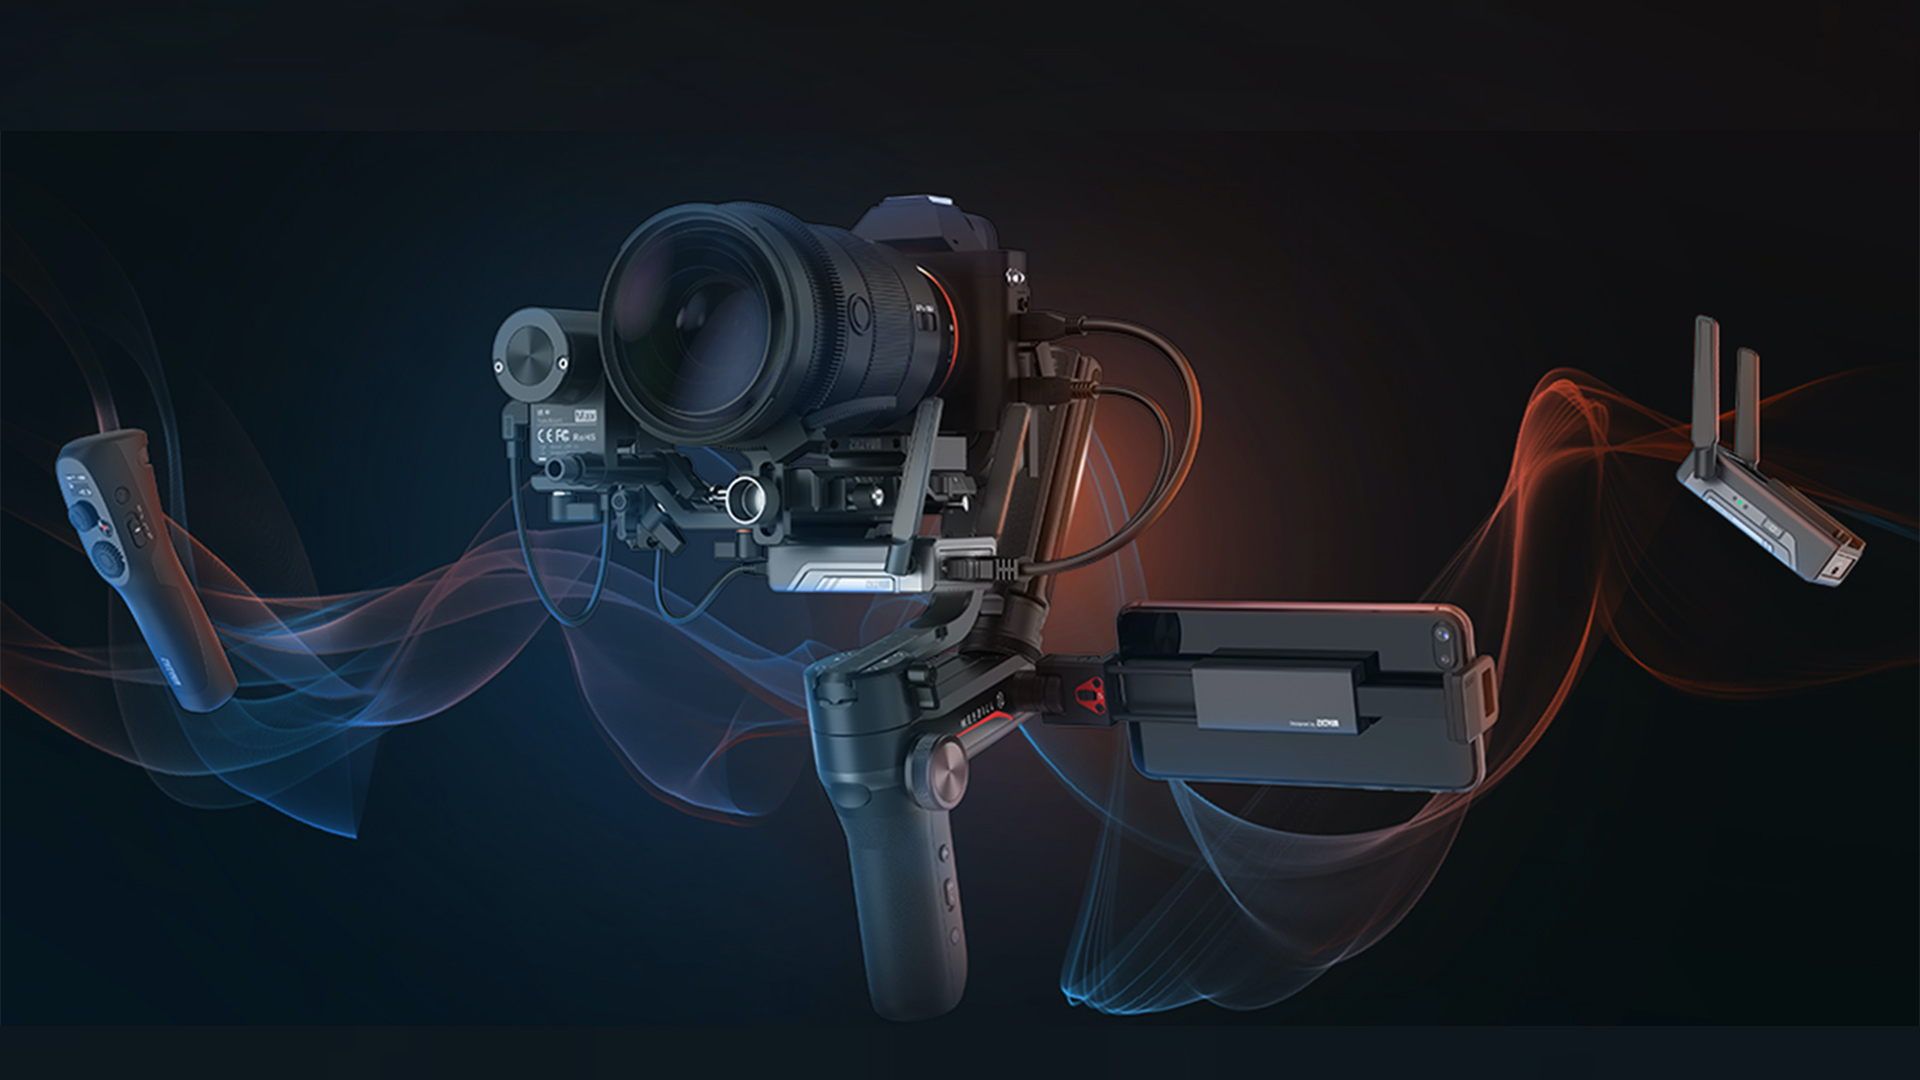 Zhiyun's new WEEBILL-S Gimbal is one of the most compact yet